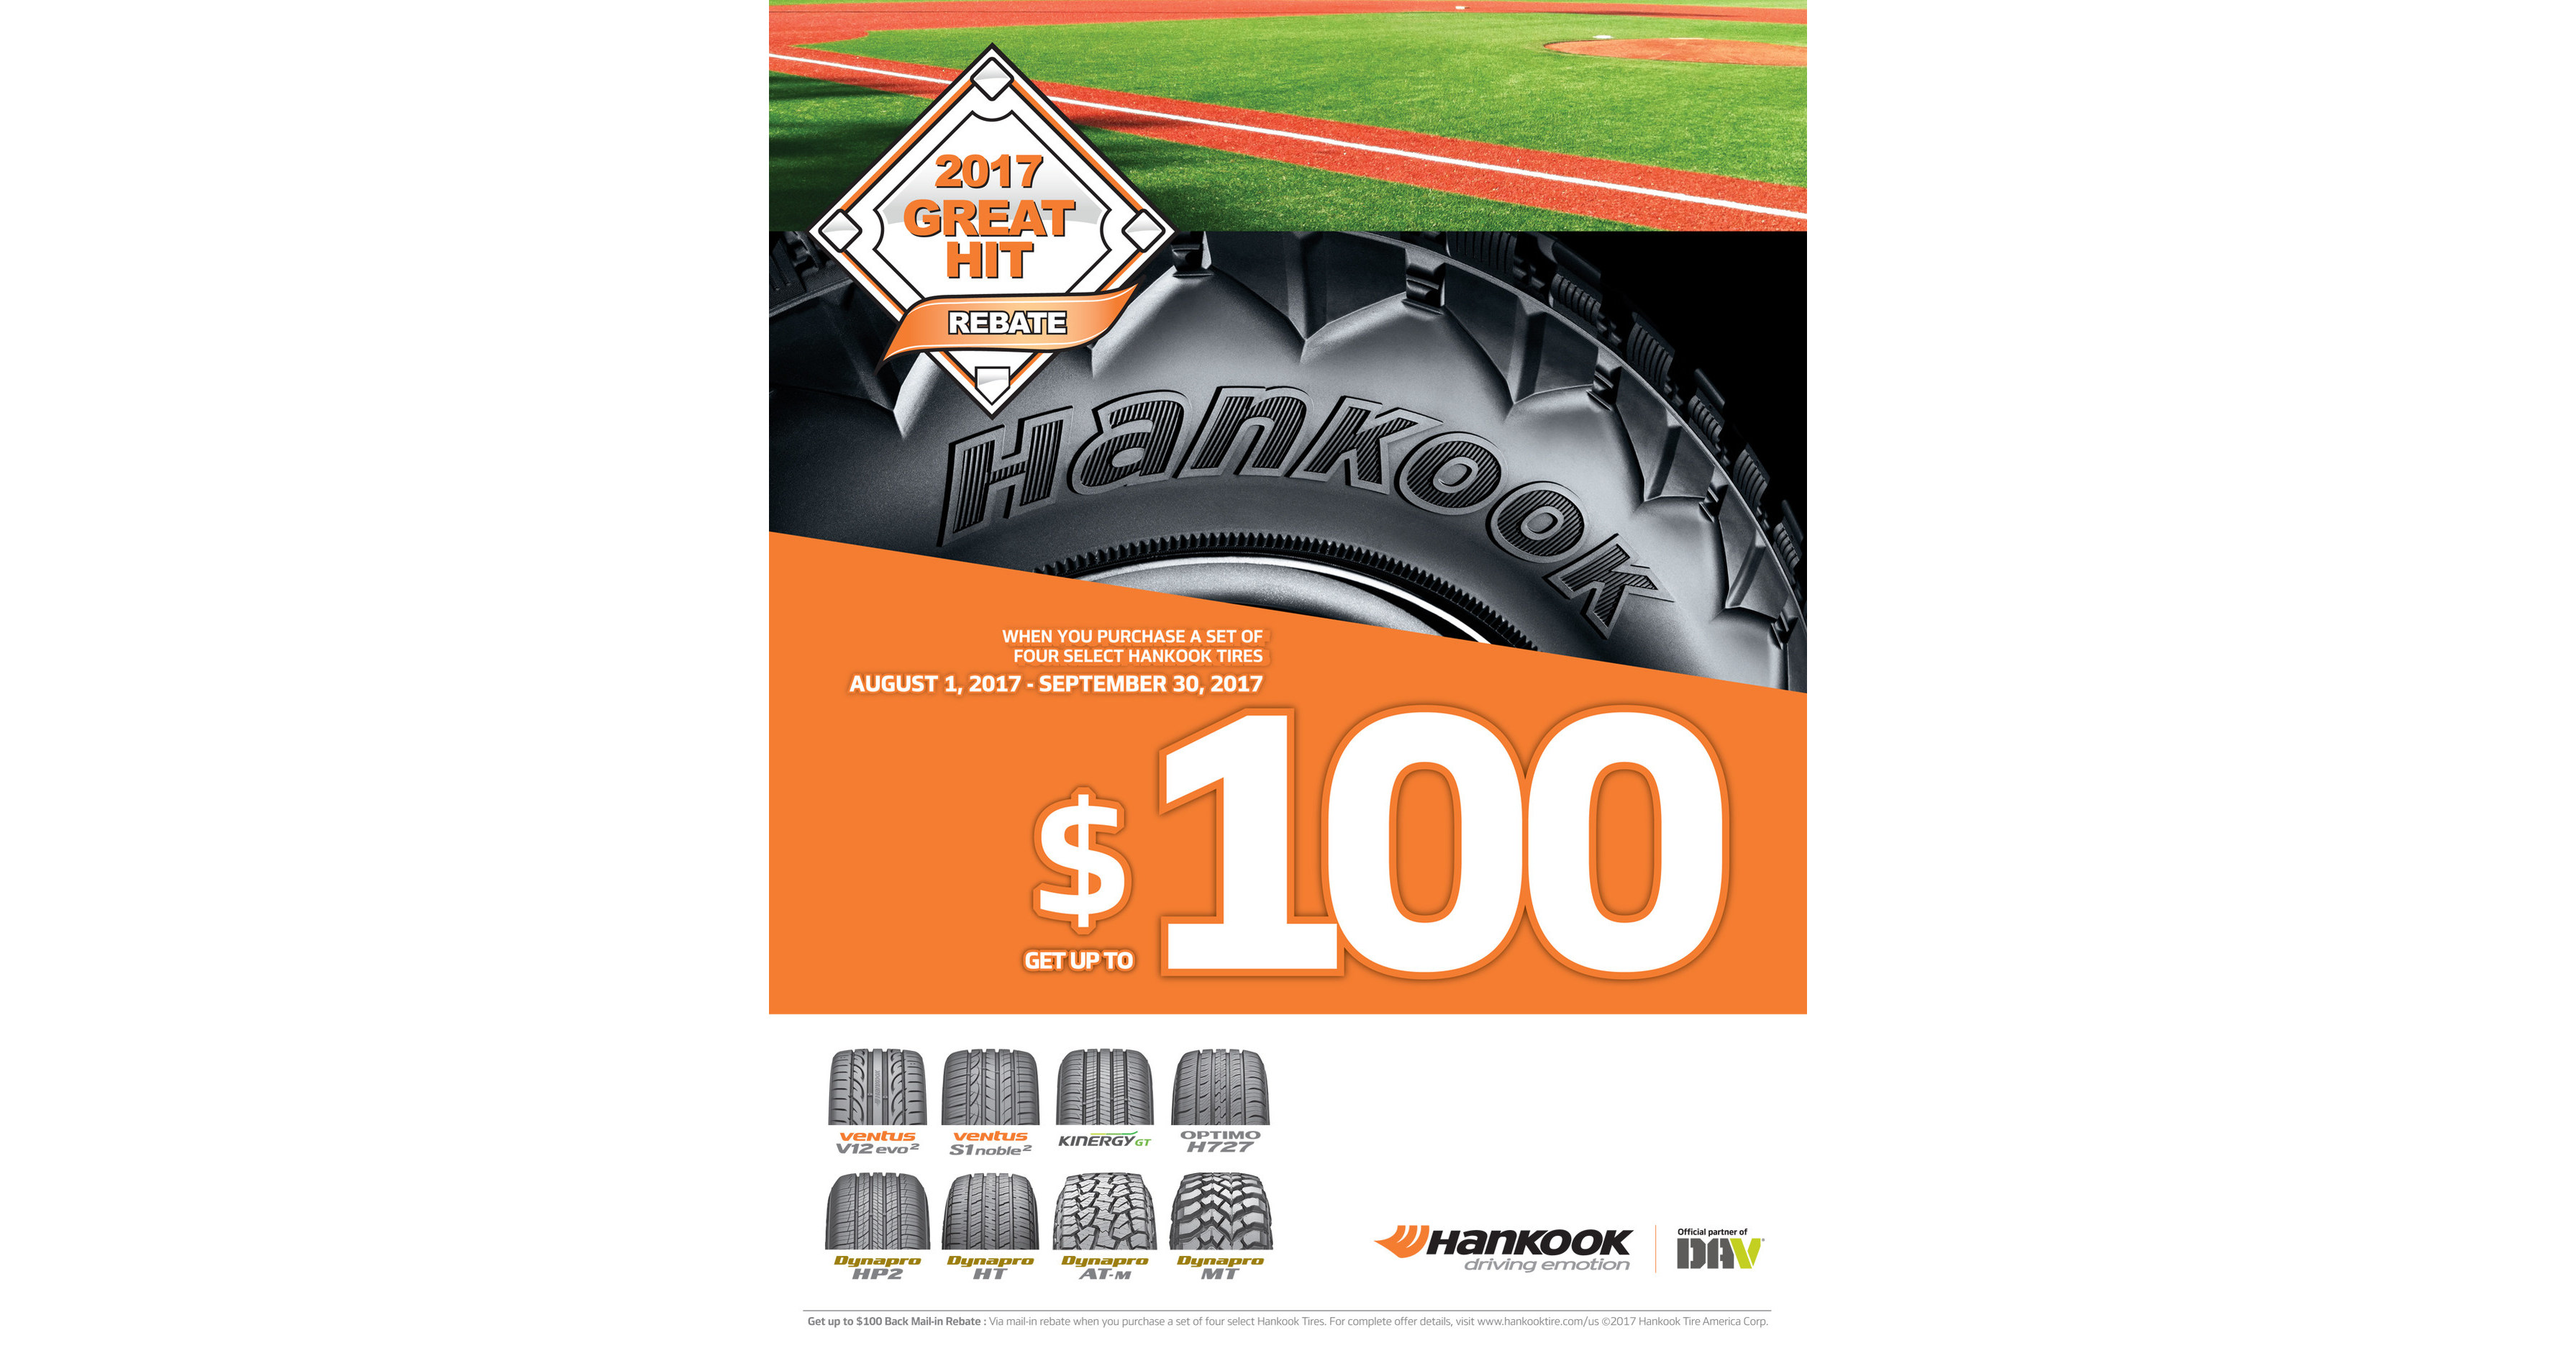 hankook-tire-delivers-home-run-offer-with-2017-great-hit-rebate-promotion